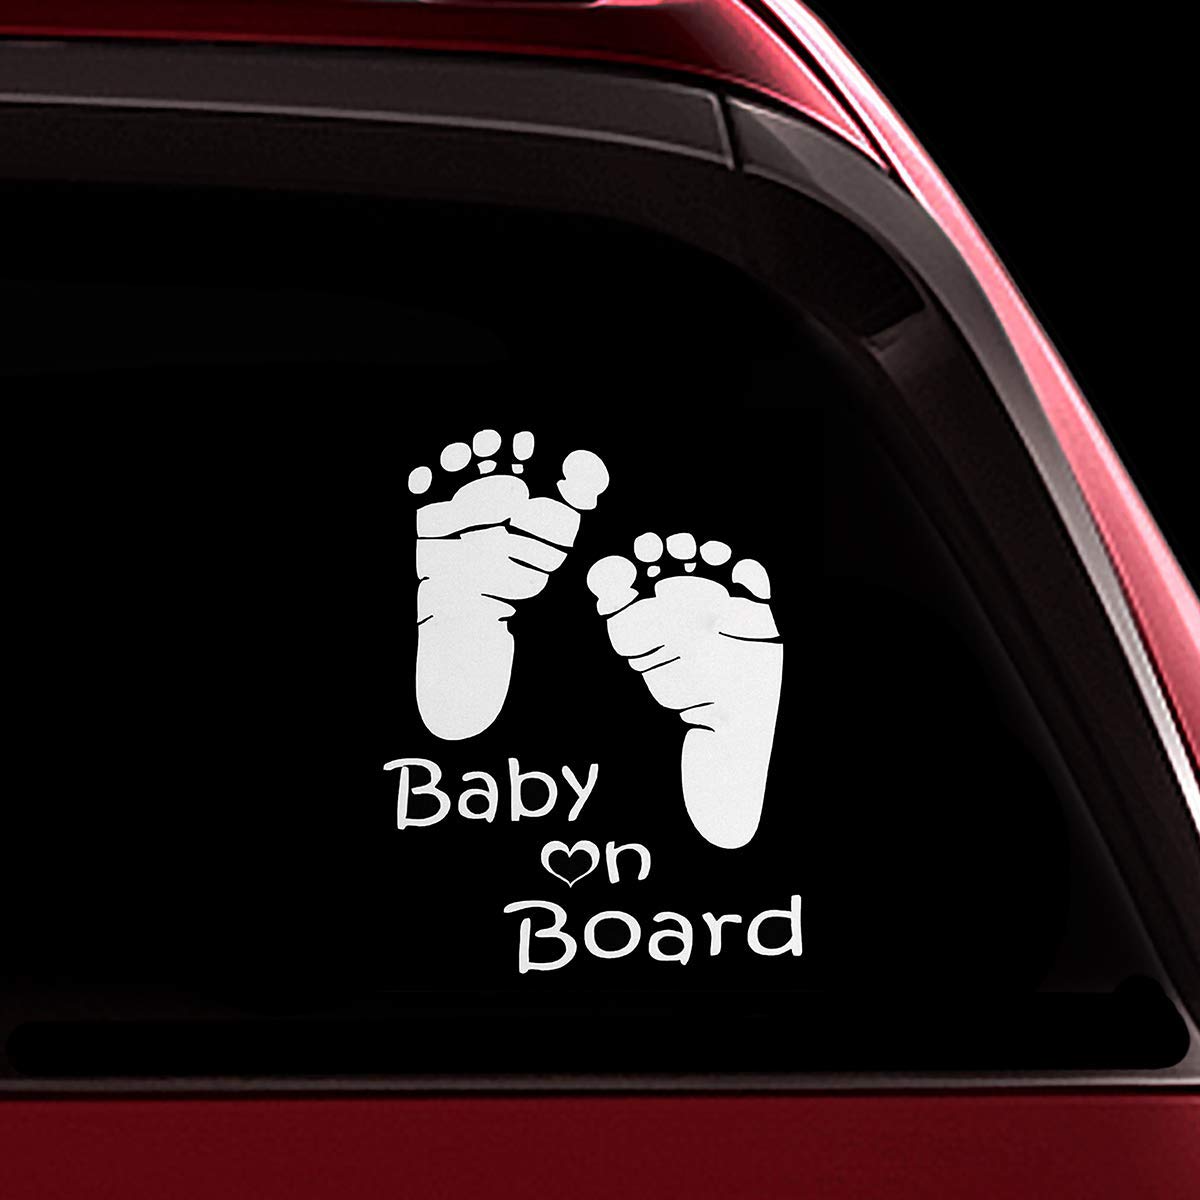 TOTOMO Baby on Board Sticker for Cars Funny Cute Safety Caution Decal Sign for Car Window and Bumper No Need for Magnet or Sucti